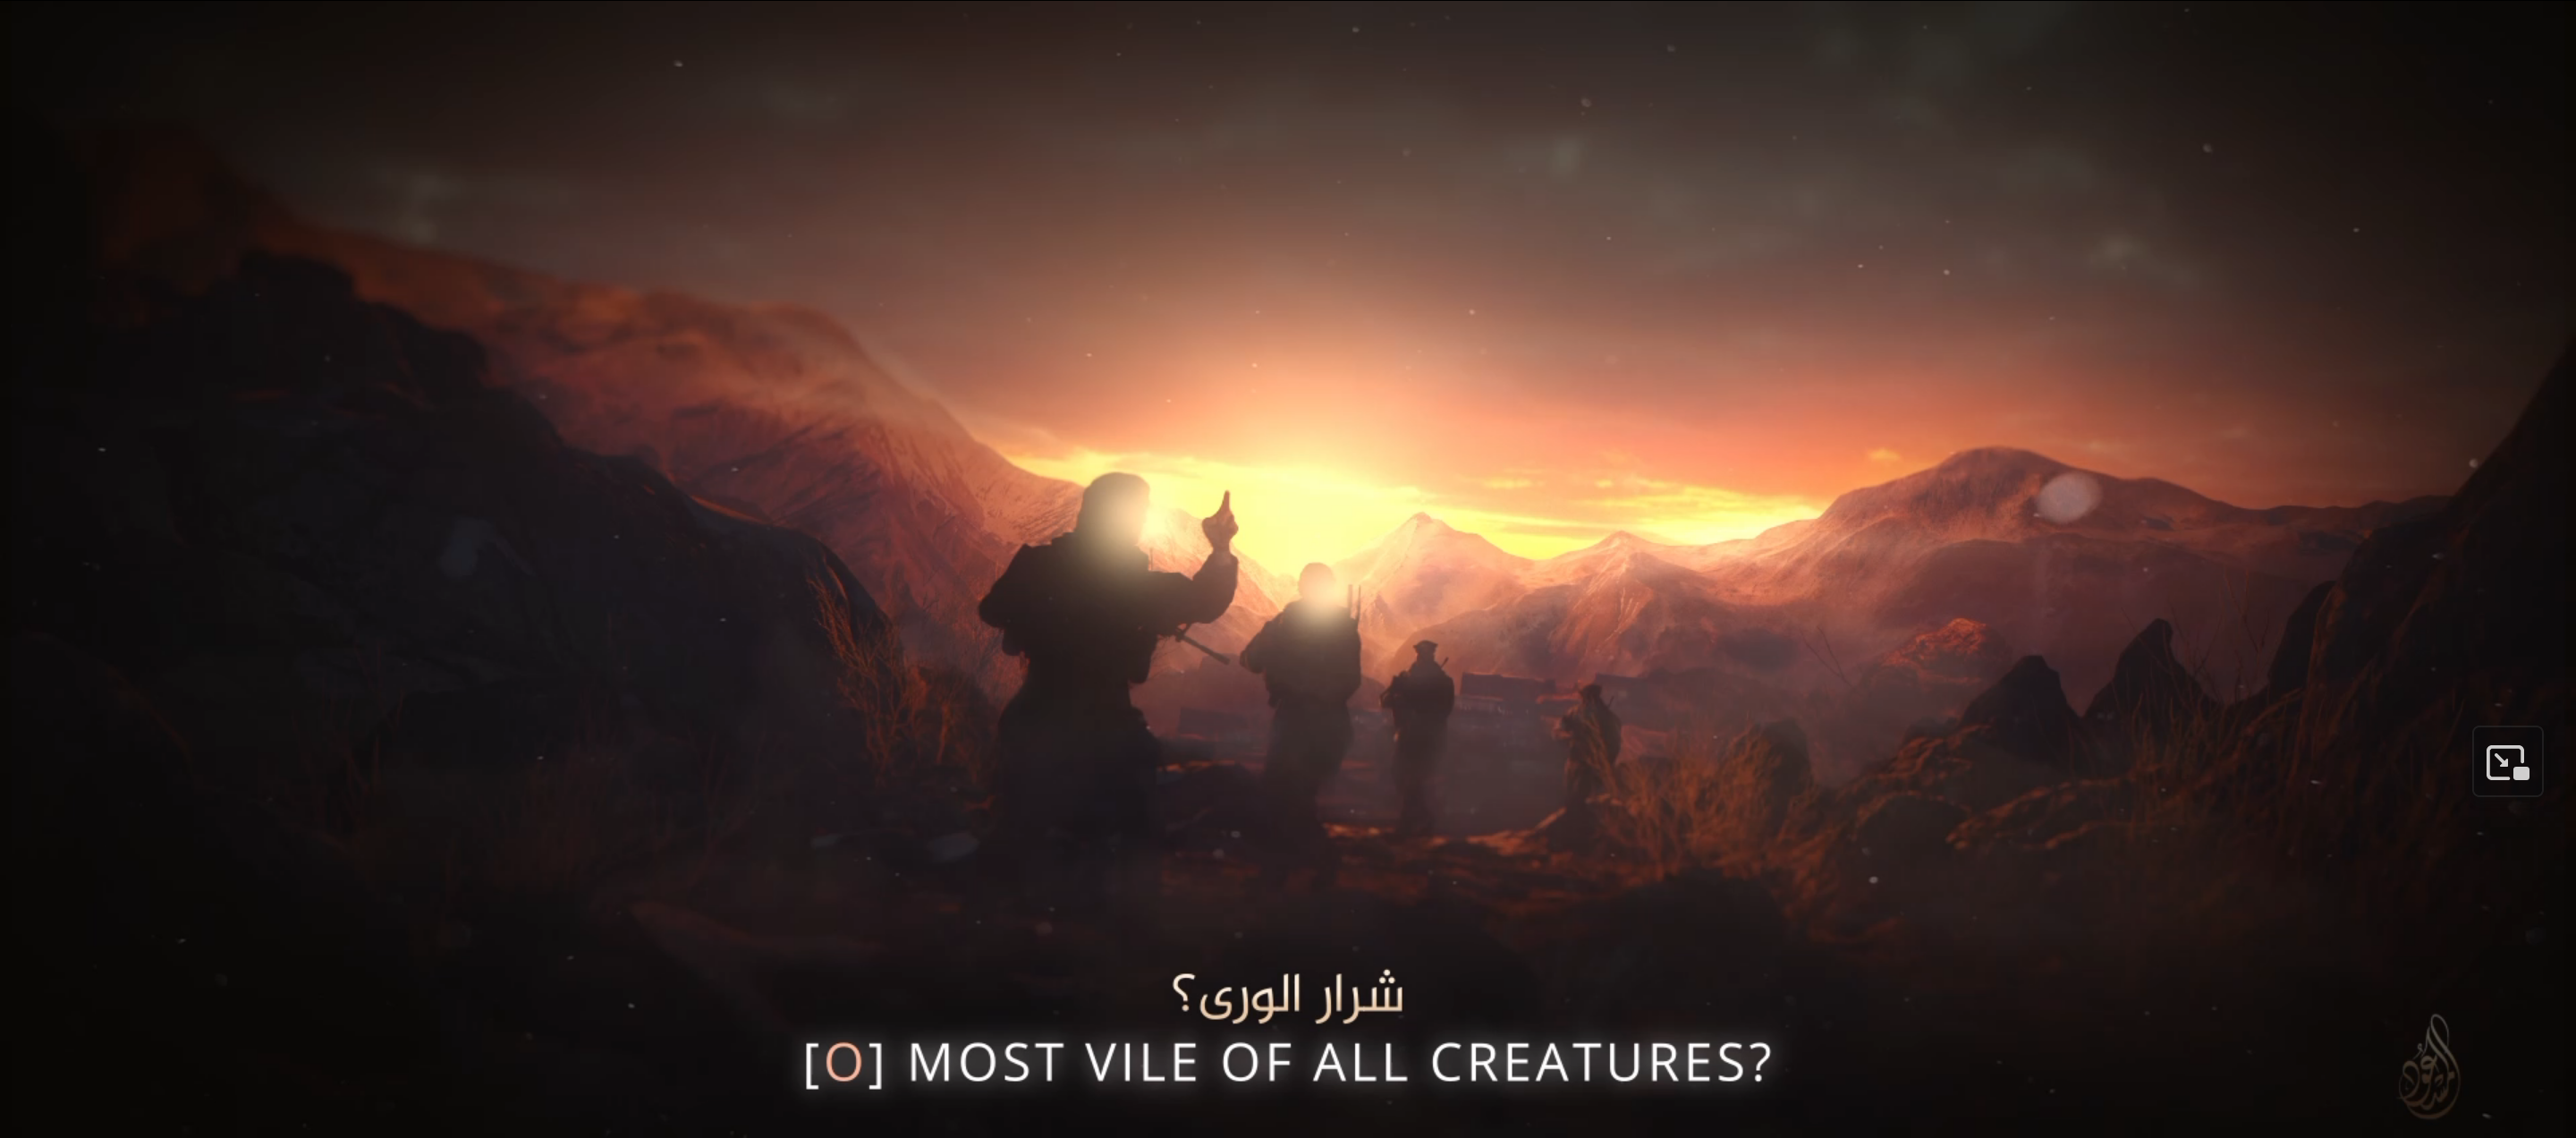 [O] most vile of all creatures? Blank Meme Template